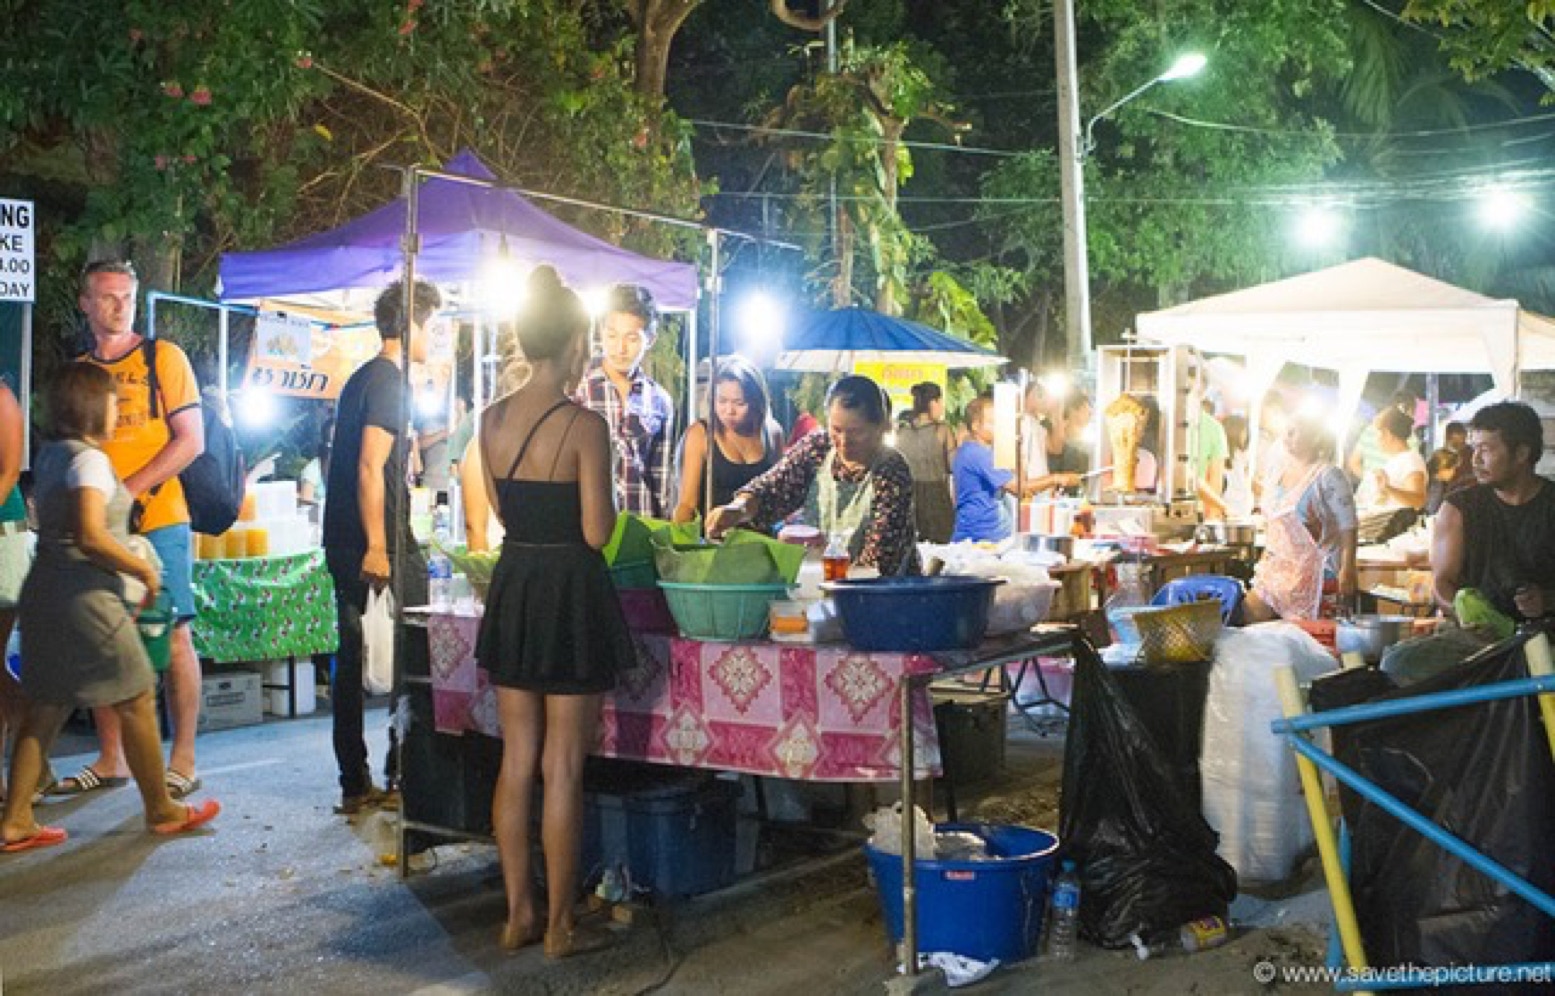 Indulge in the delicious and diverse cuisine of Koh Samui's Night Market. A foodie's paradise in Thailand, not to be missed! #KohSamui #NightMarket #FoodieHeaven